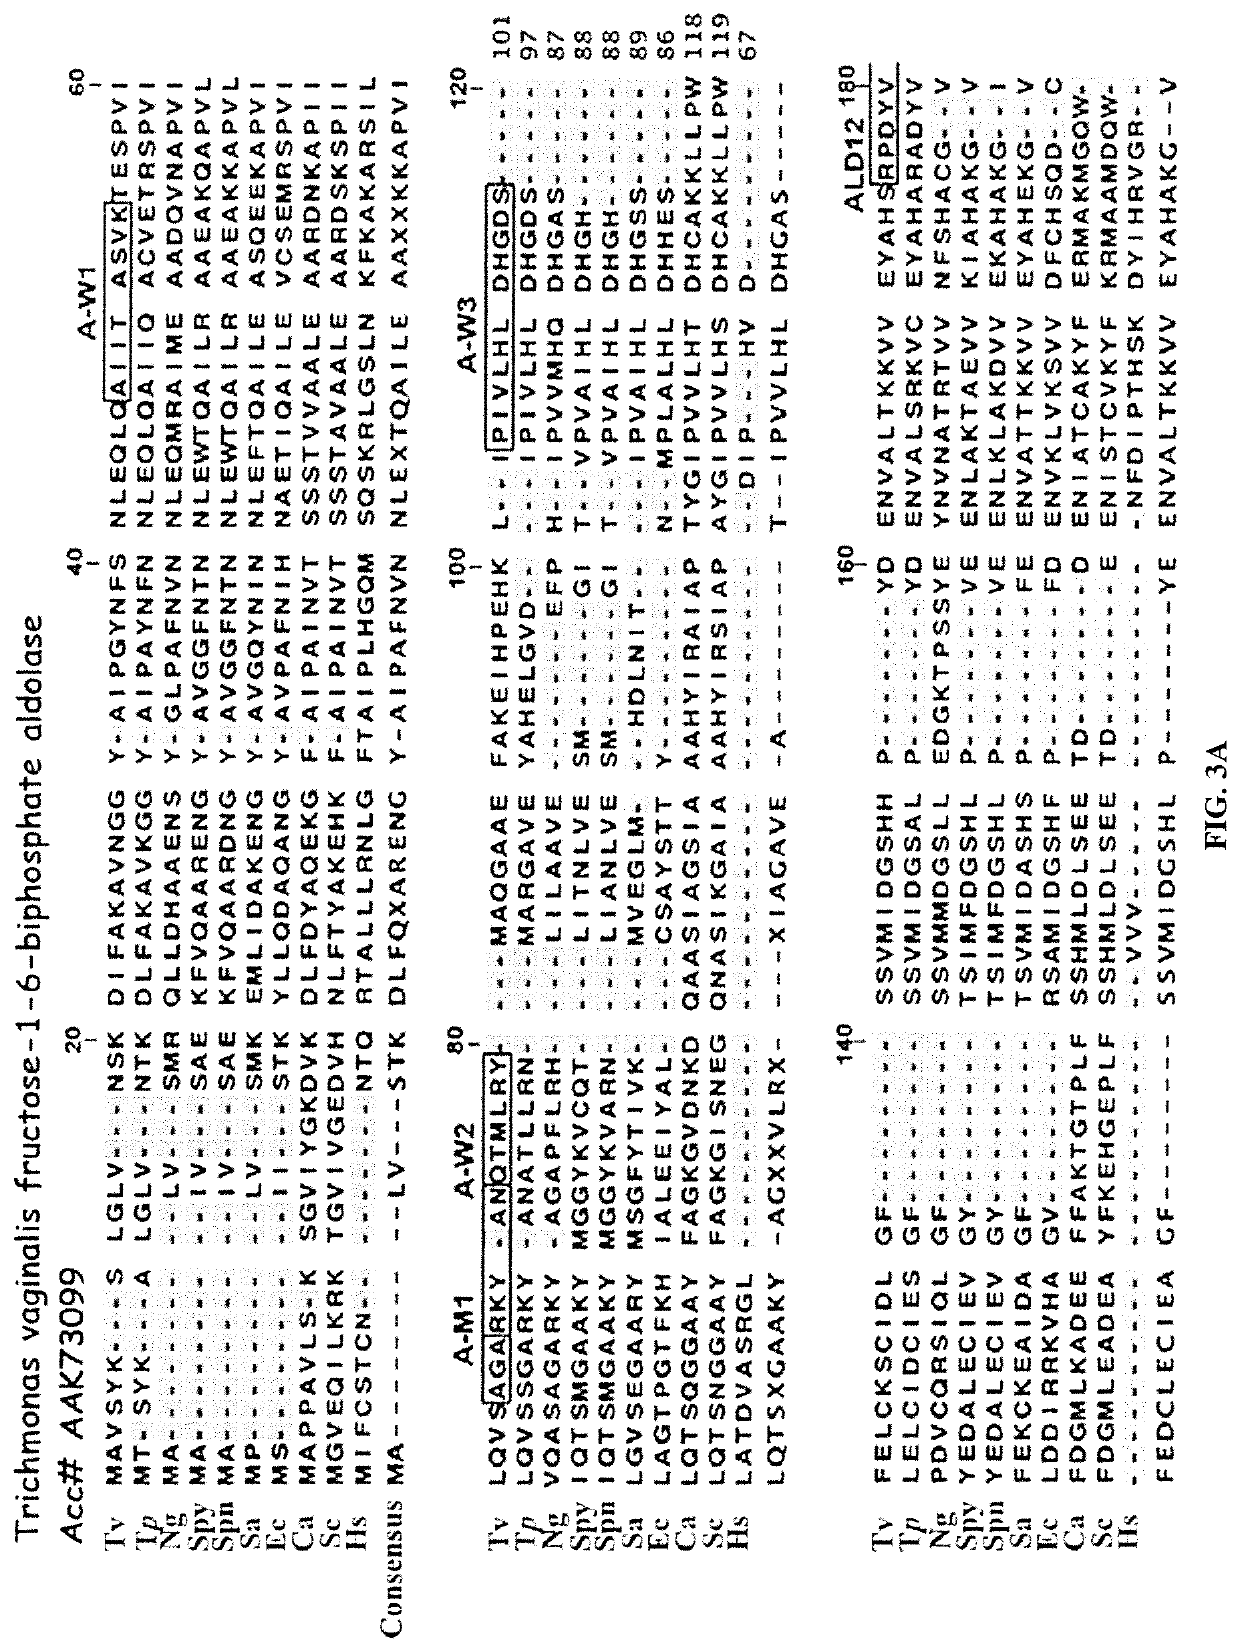 Strings of epitopes useful in diagnosing and eliciting immune responses to sexually transmitted infections